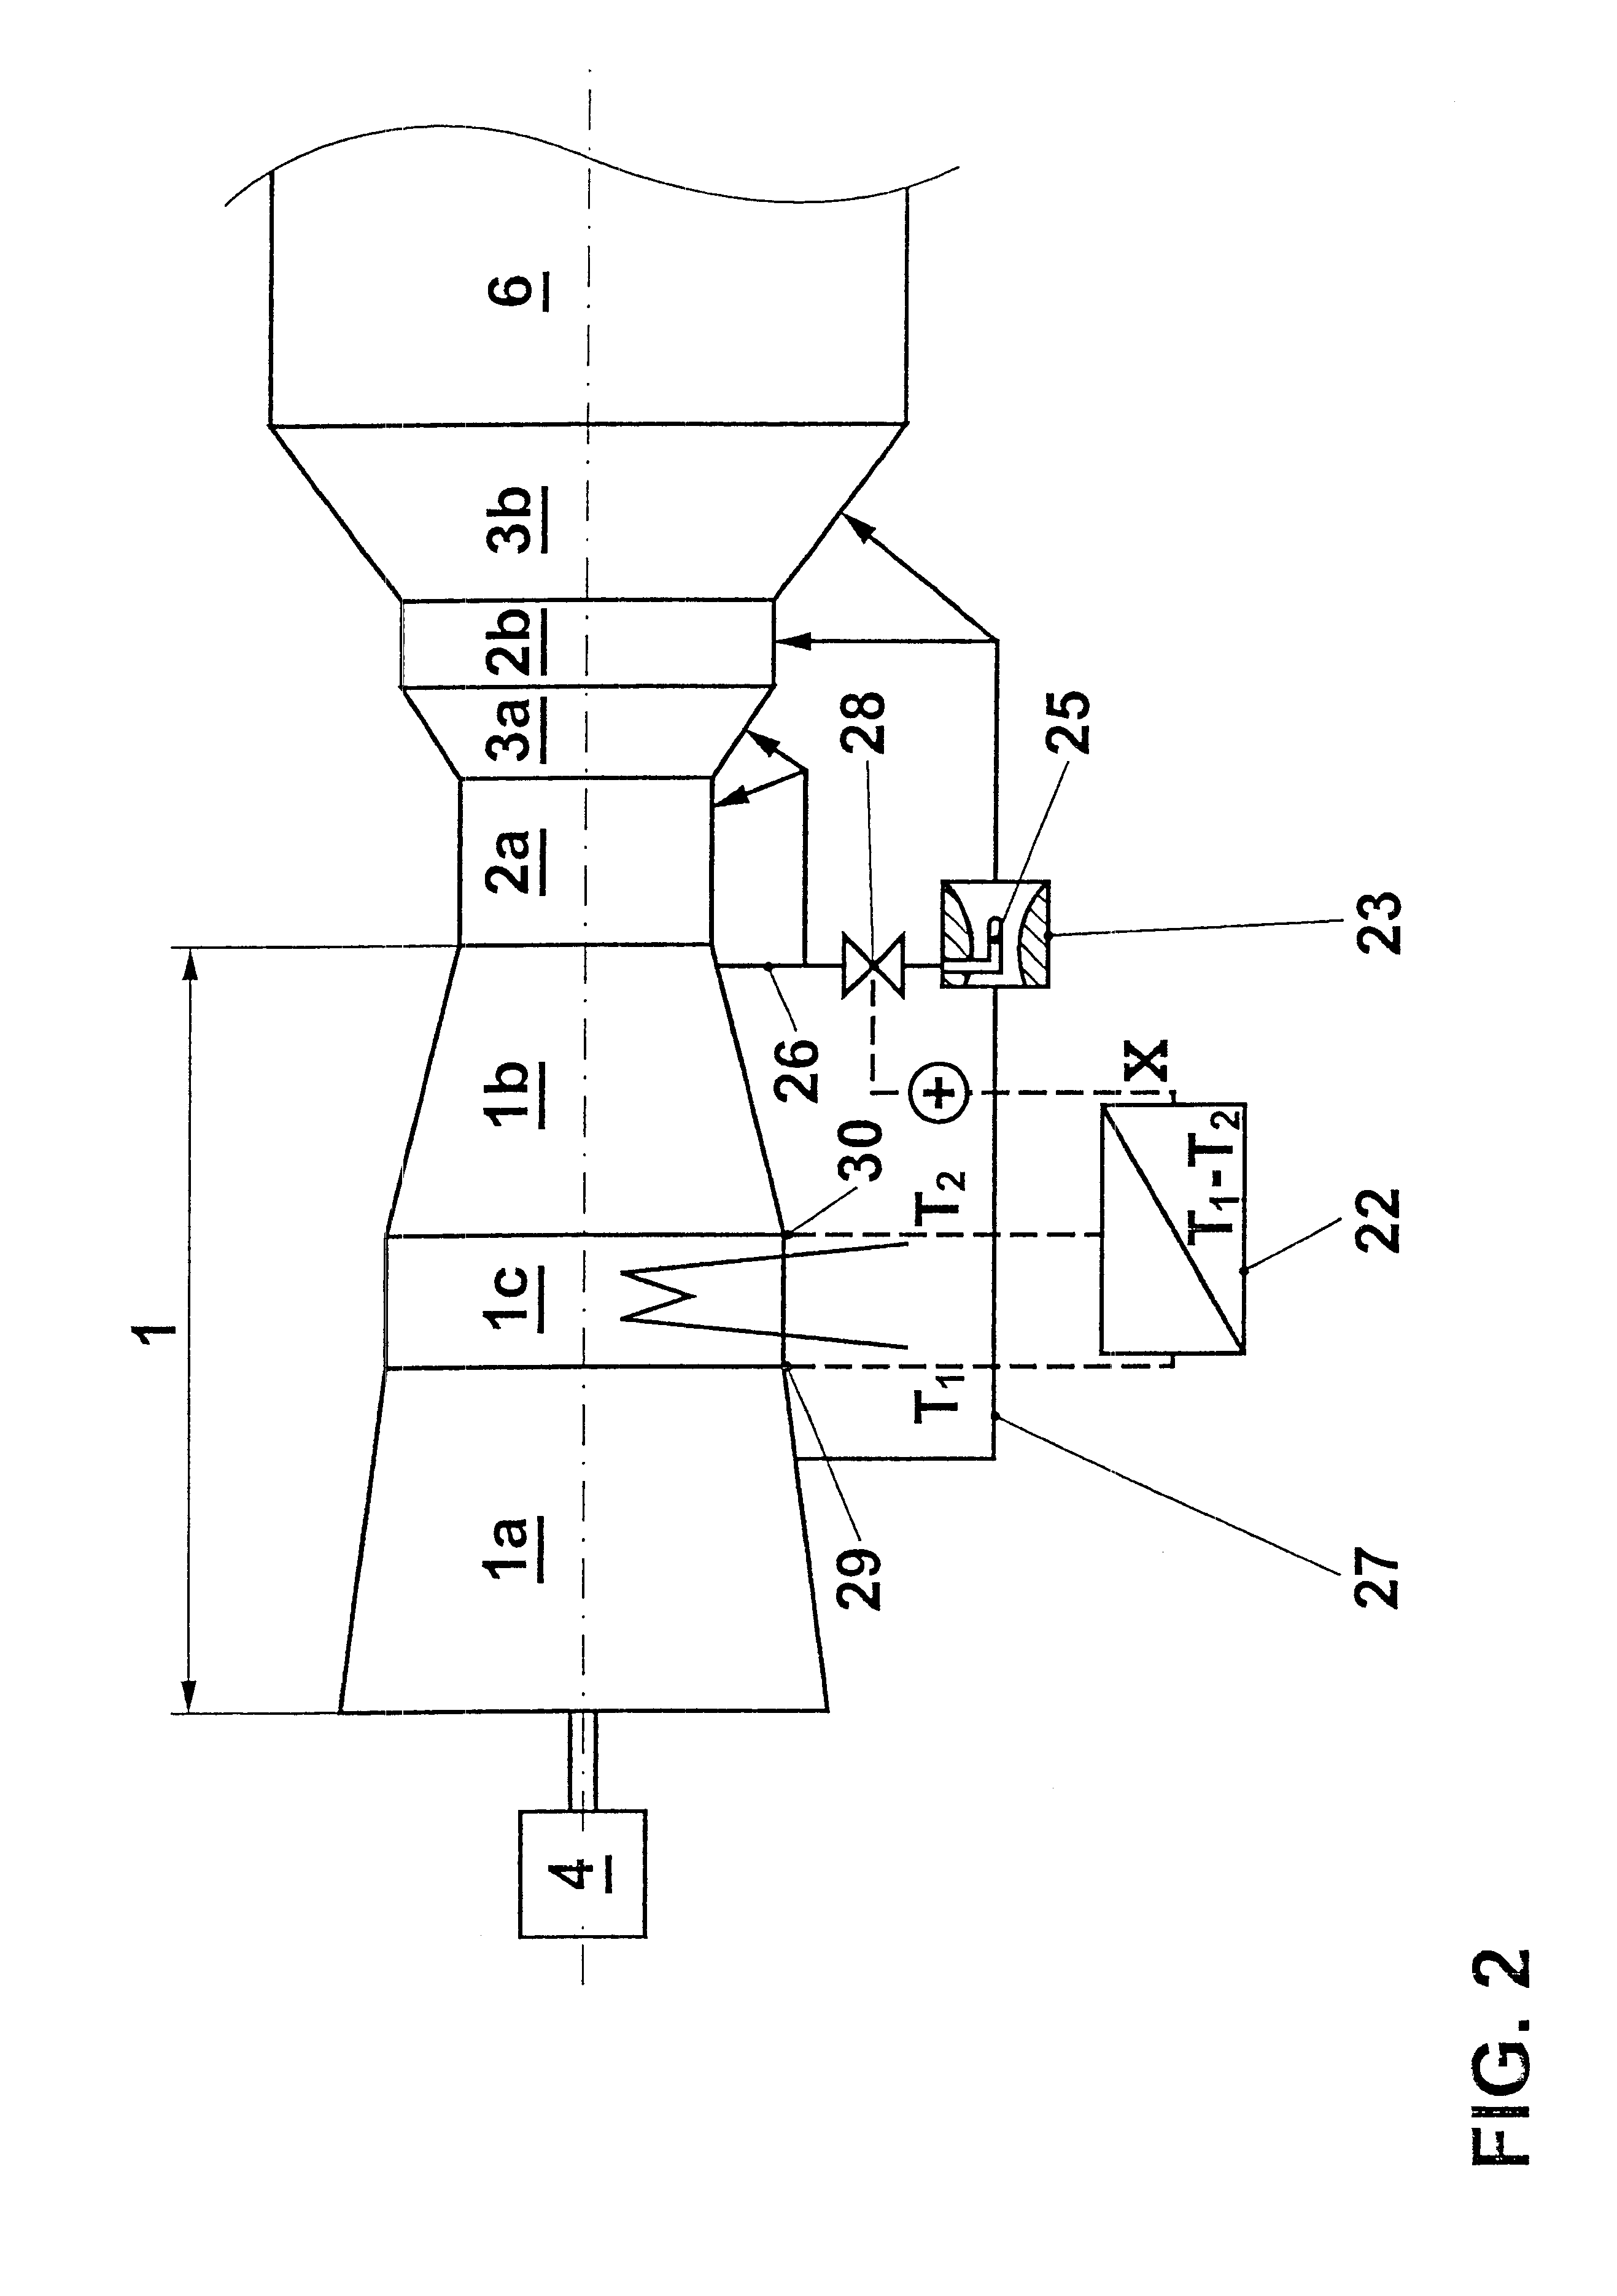 Process for controlling the cooling air mass flow of a gas turbine set